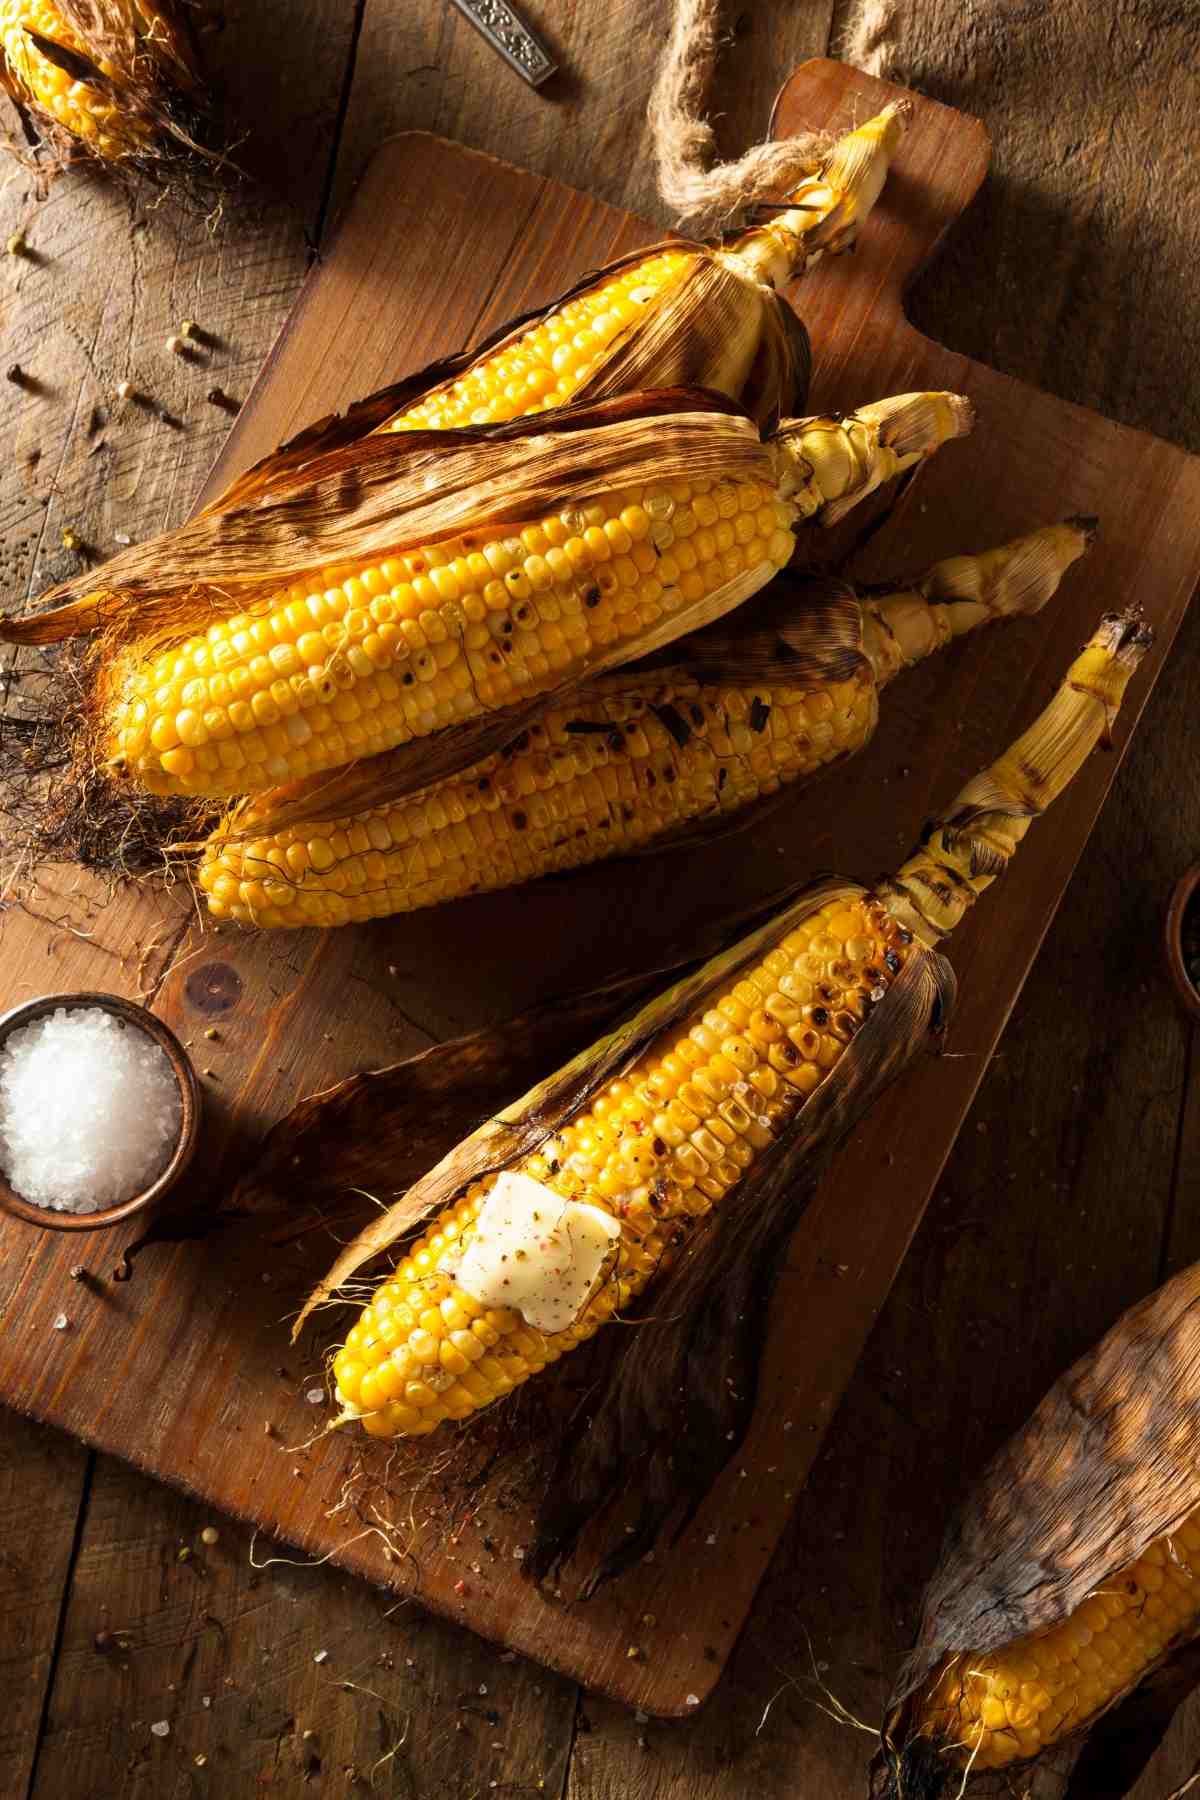 Leaving the husks on grilled corn produces corn that’s perfectly plump, tender, and sweet. The next time corn is on the menu, give this method a try. You’ll love the results!